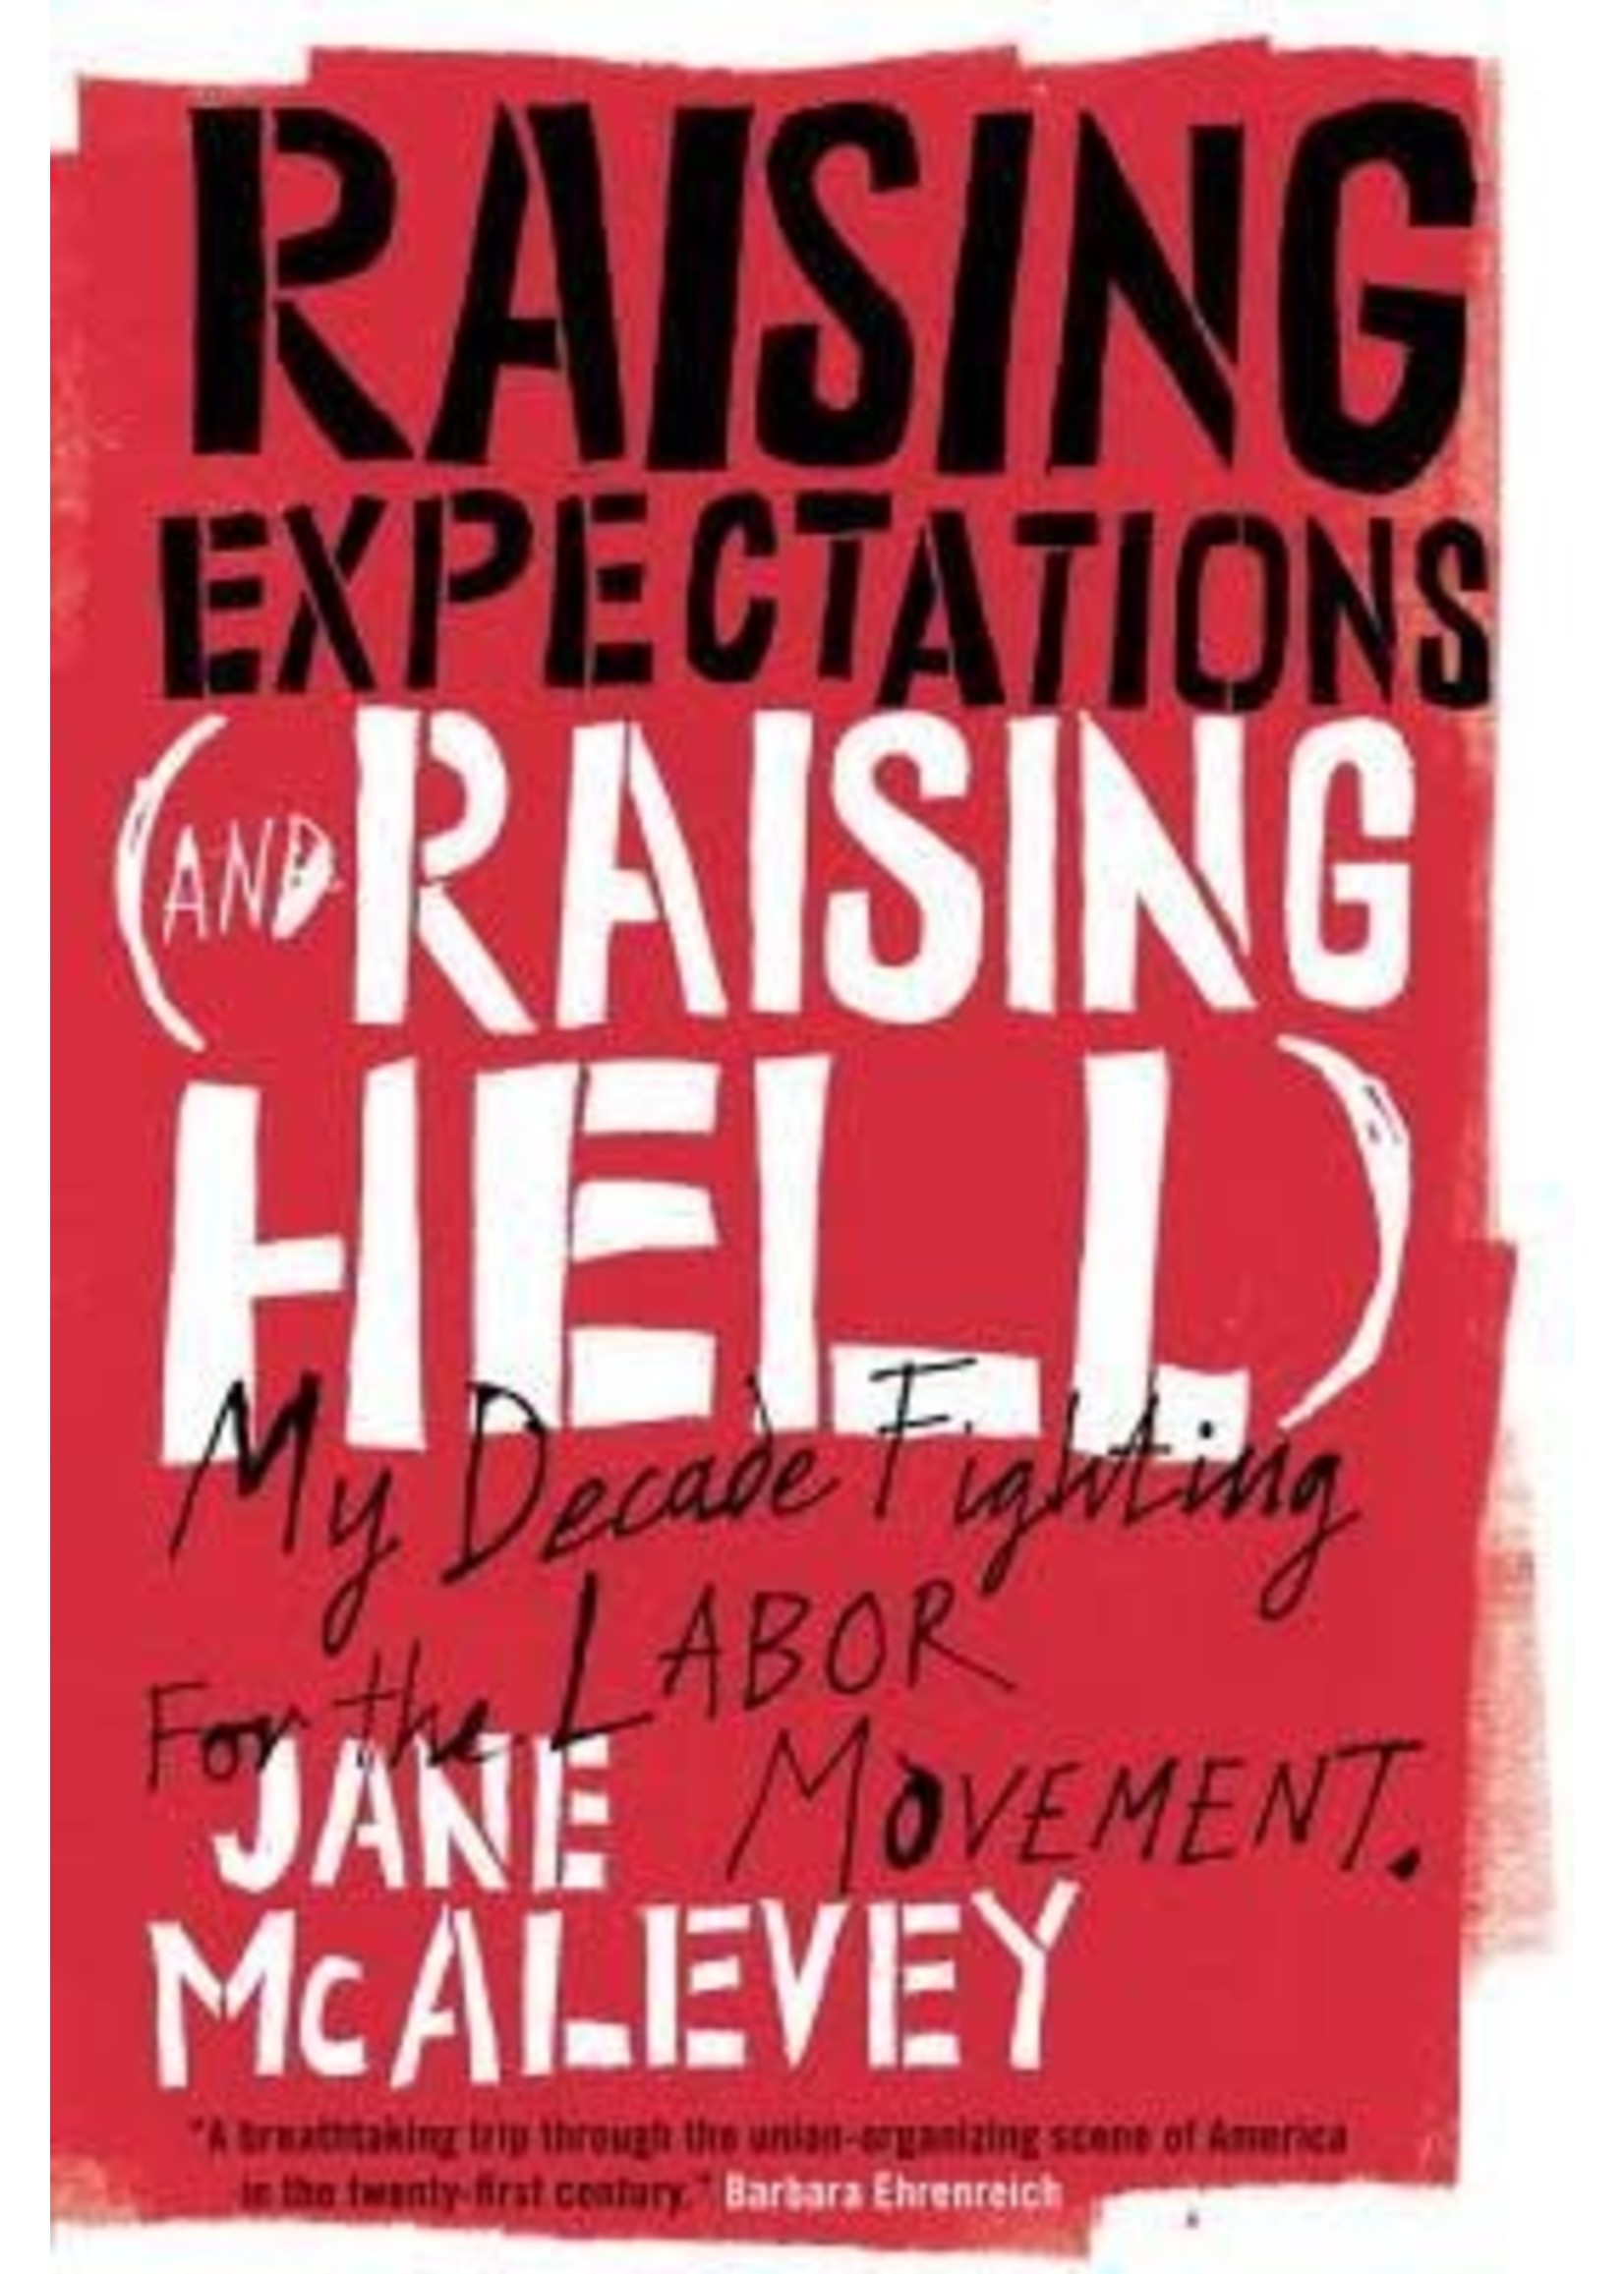 Raising Expectations (and Raising Hell): My Decade Fighting for the Labor Movement by Jane F. McAlevey